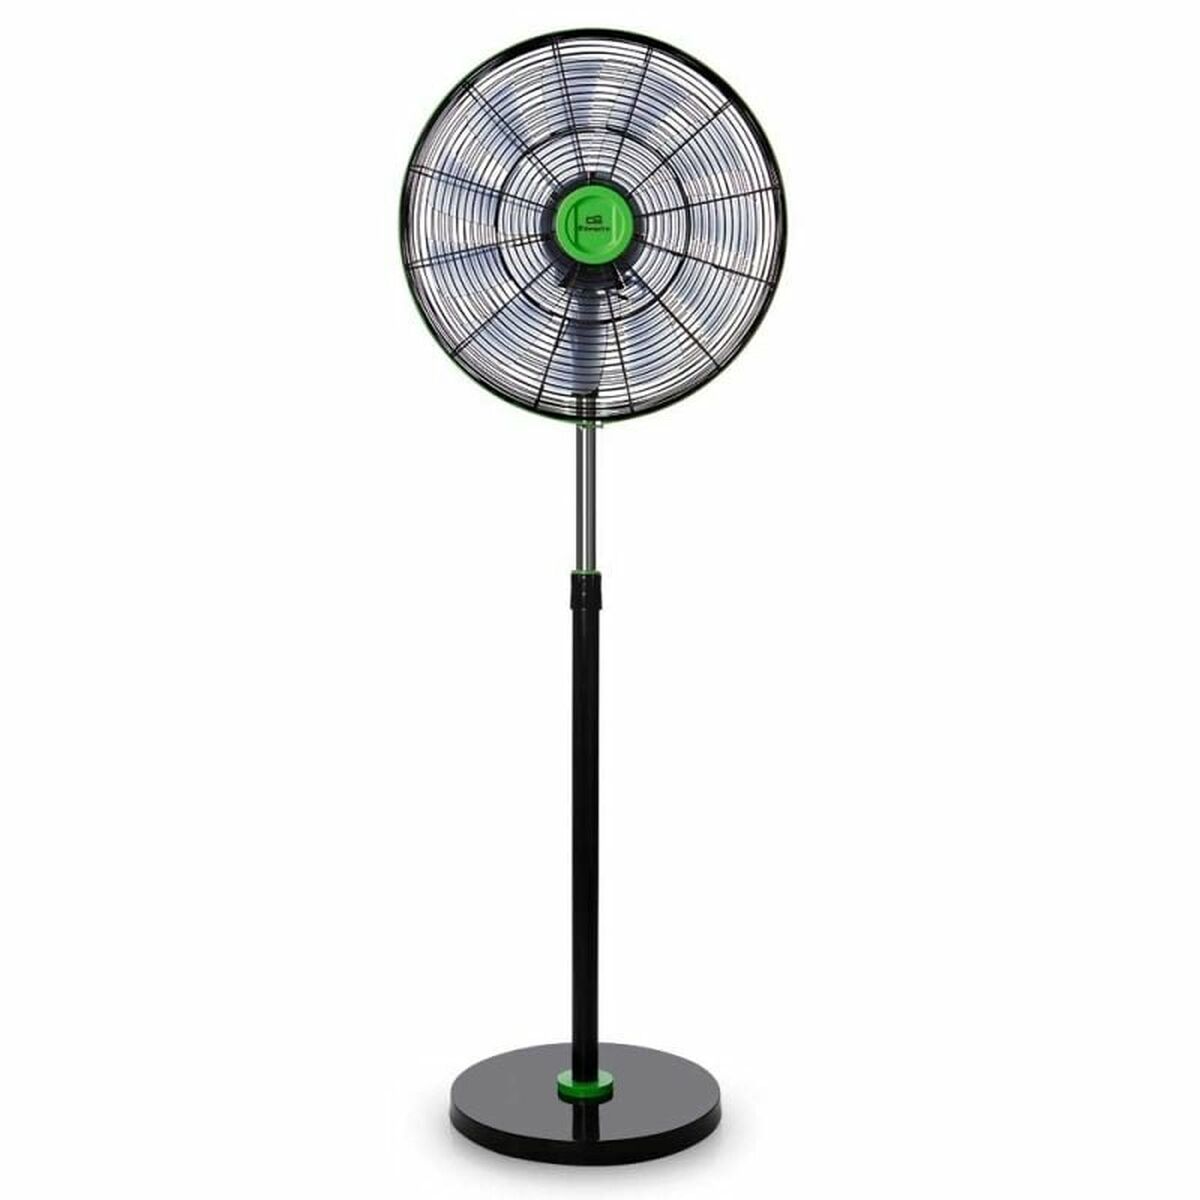 Freestanding Fan Orbegozo SF 0248 90 W, Orbegozo, Home and cooking, Portable air conditioning, freestanding-fan-orbegozo-sf-0248-90-w-1, Brand_Orbegozo, category-reference-2399, category-reference-2450, category-reference-2451, category-reference-t-19656, category-reference-t-21087, category-reference-t-25217, category-reference-t-29130, Condition_NEW, ferretería, Price_100 - 200, summer, RiotNook